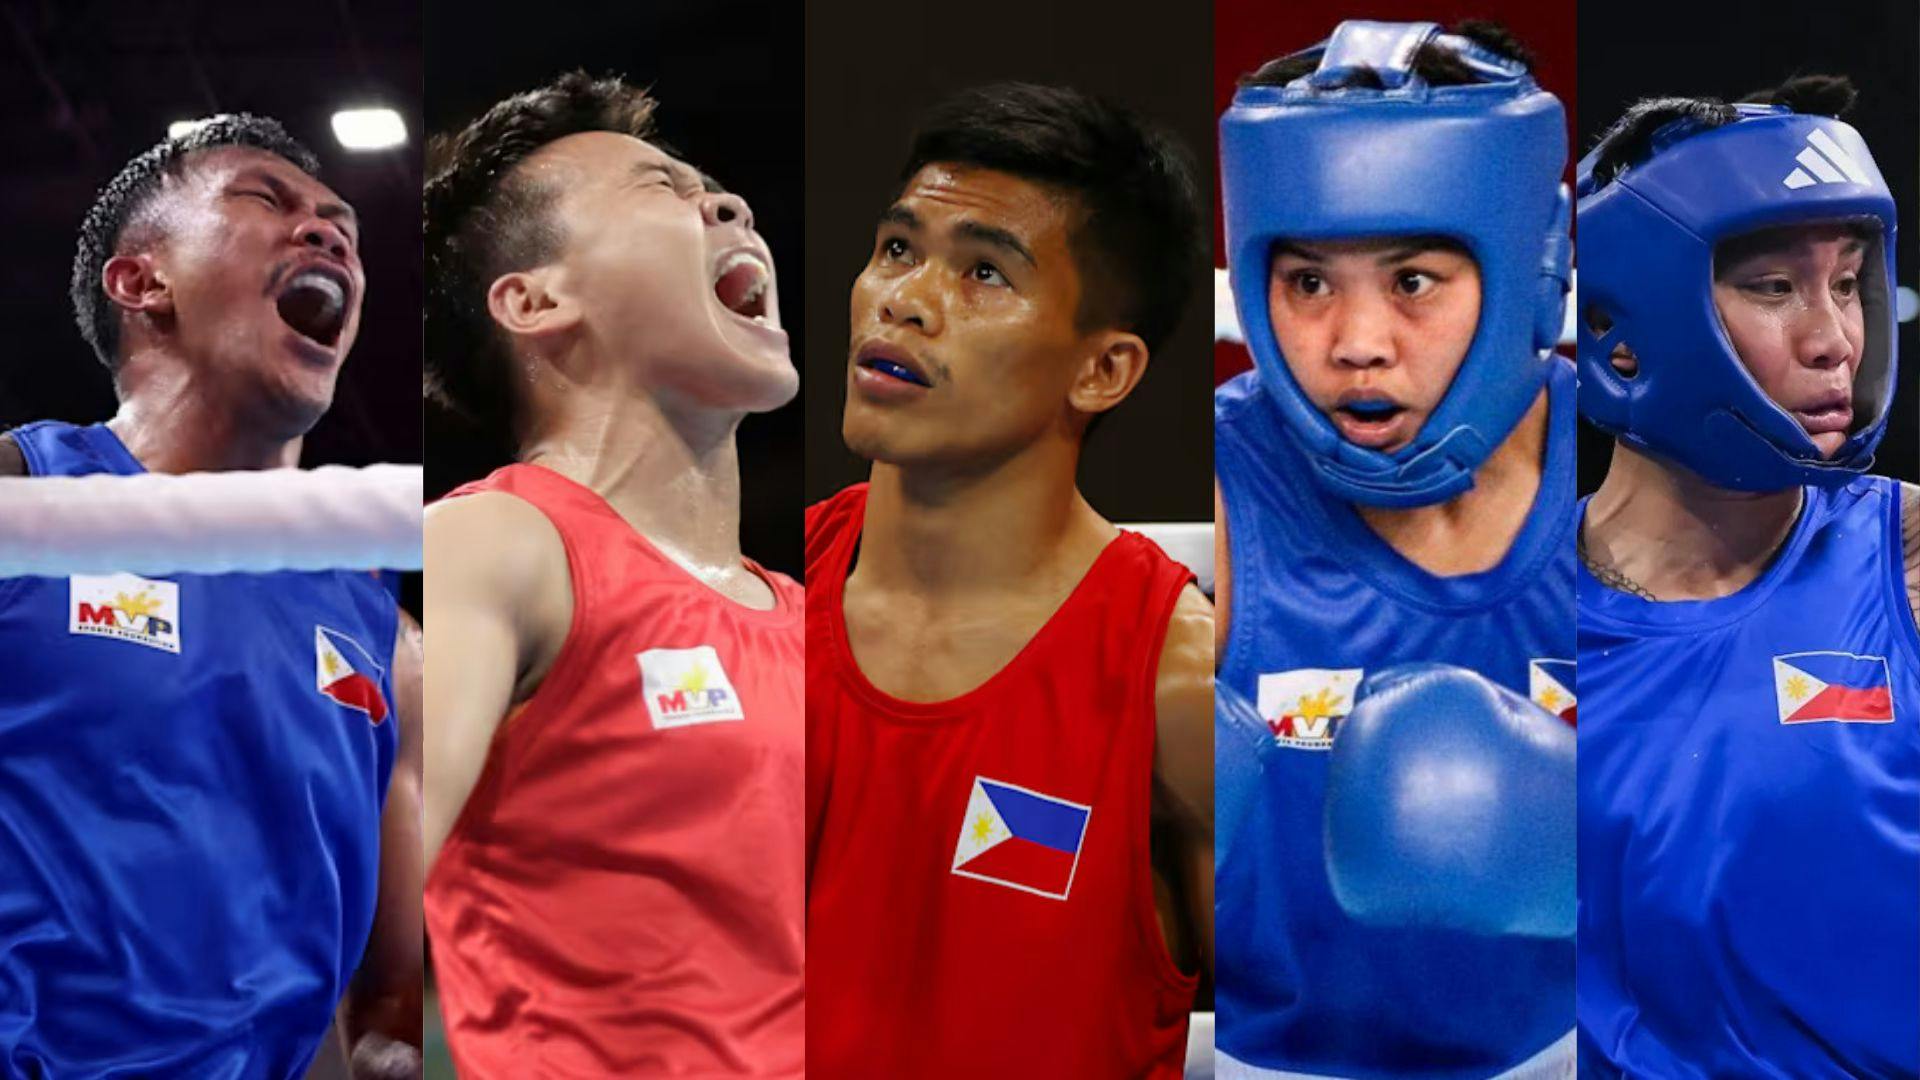 "Job is not done" | ABAP bares "tough route" of five Olympic-bound Filipino boxers to qualify for Paris 2024
